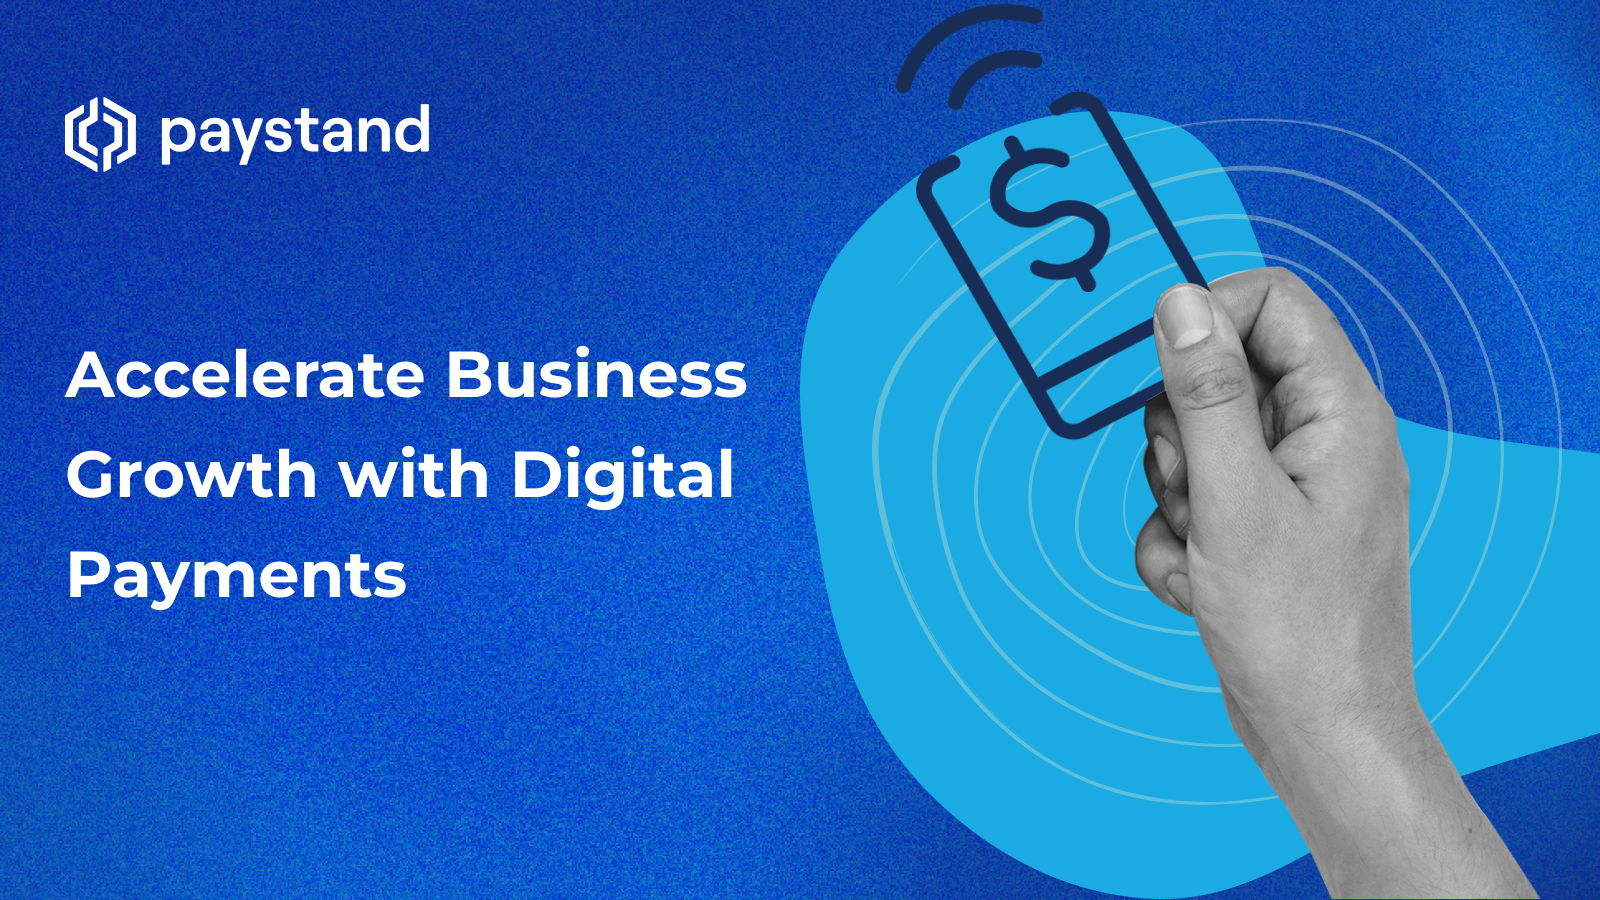 Accelerate Business Growth with Digital Payments